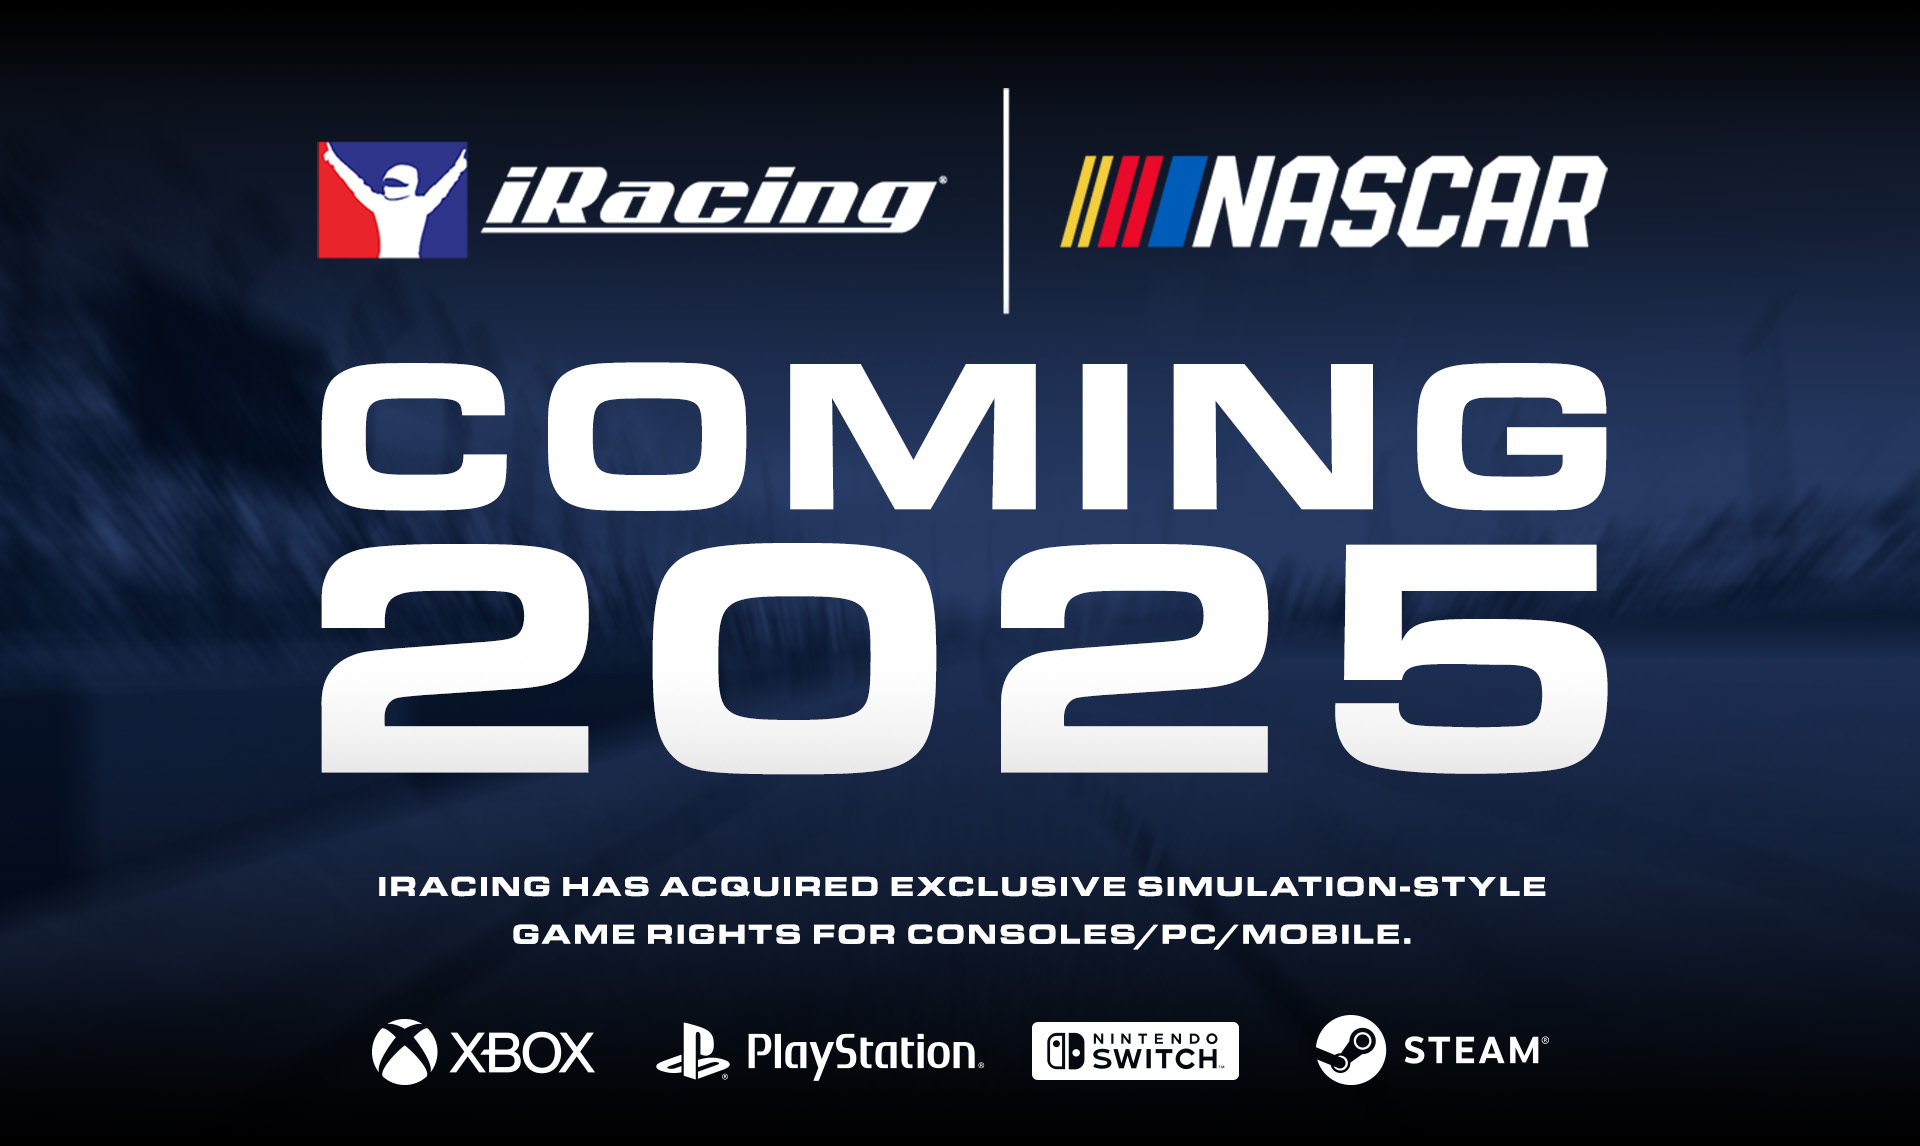 iRacing's New Horizon: Acquiring NASCAR Gaming Rights and a Fresh Start in 2025